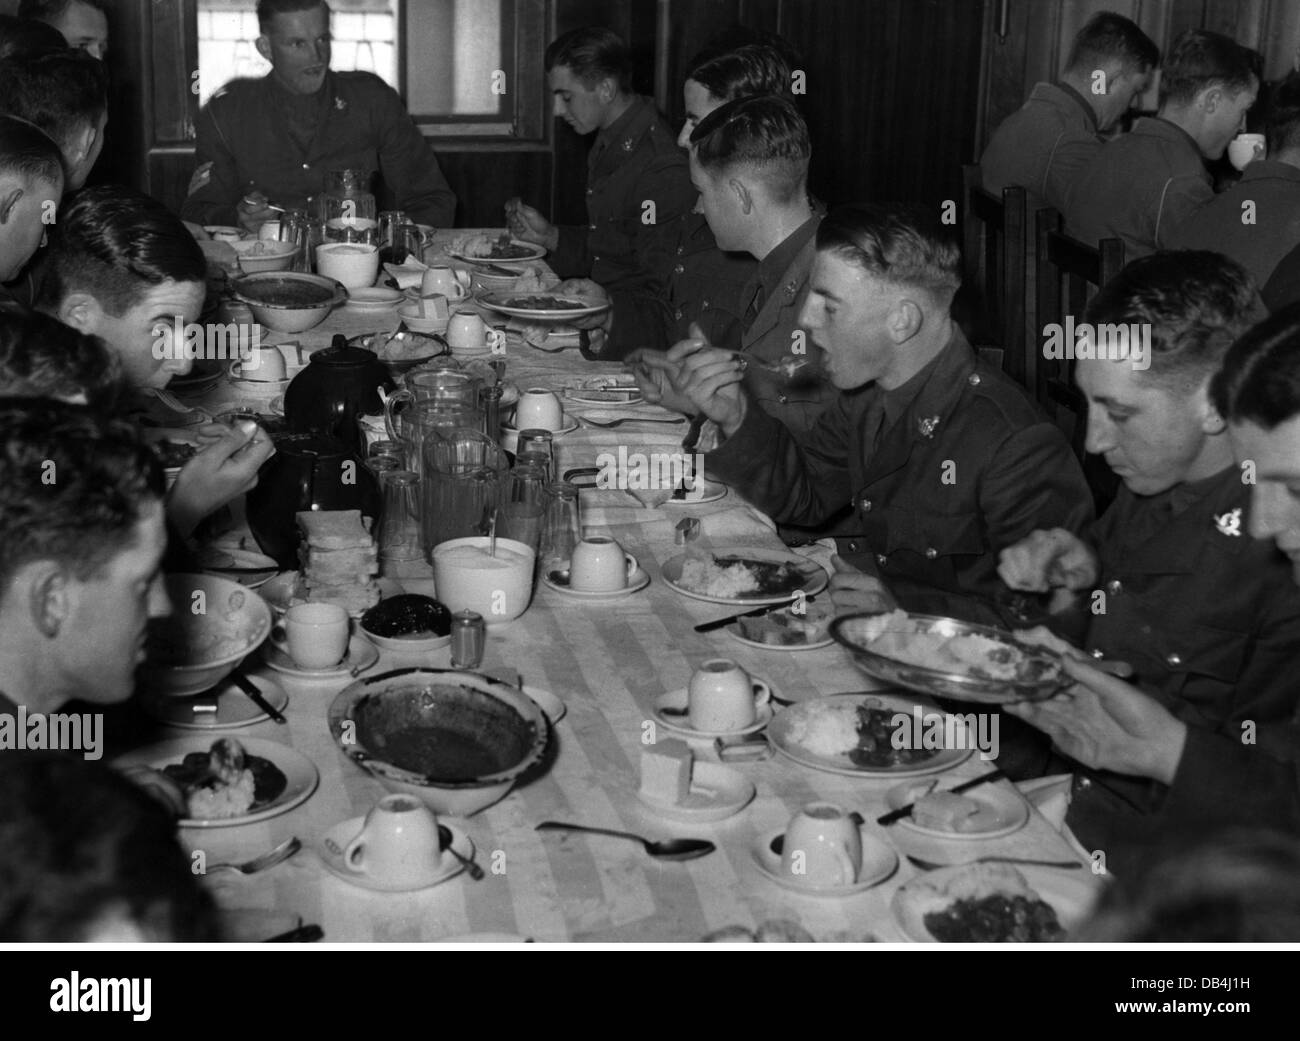 military, Australia, Royal Military College, Duntroon, circa 1940, Additional-Rights-Clearences-Not Available Stock Photo